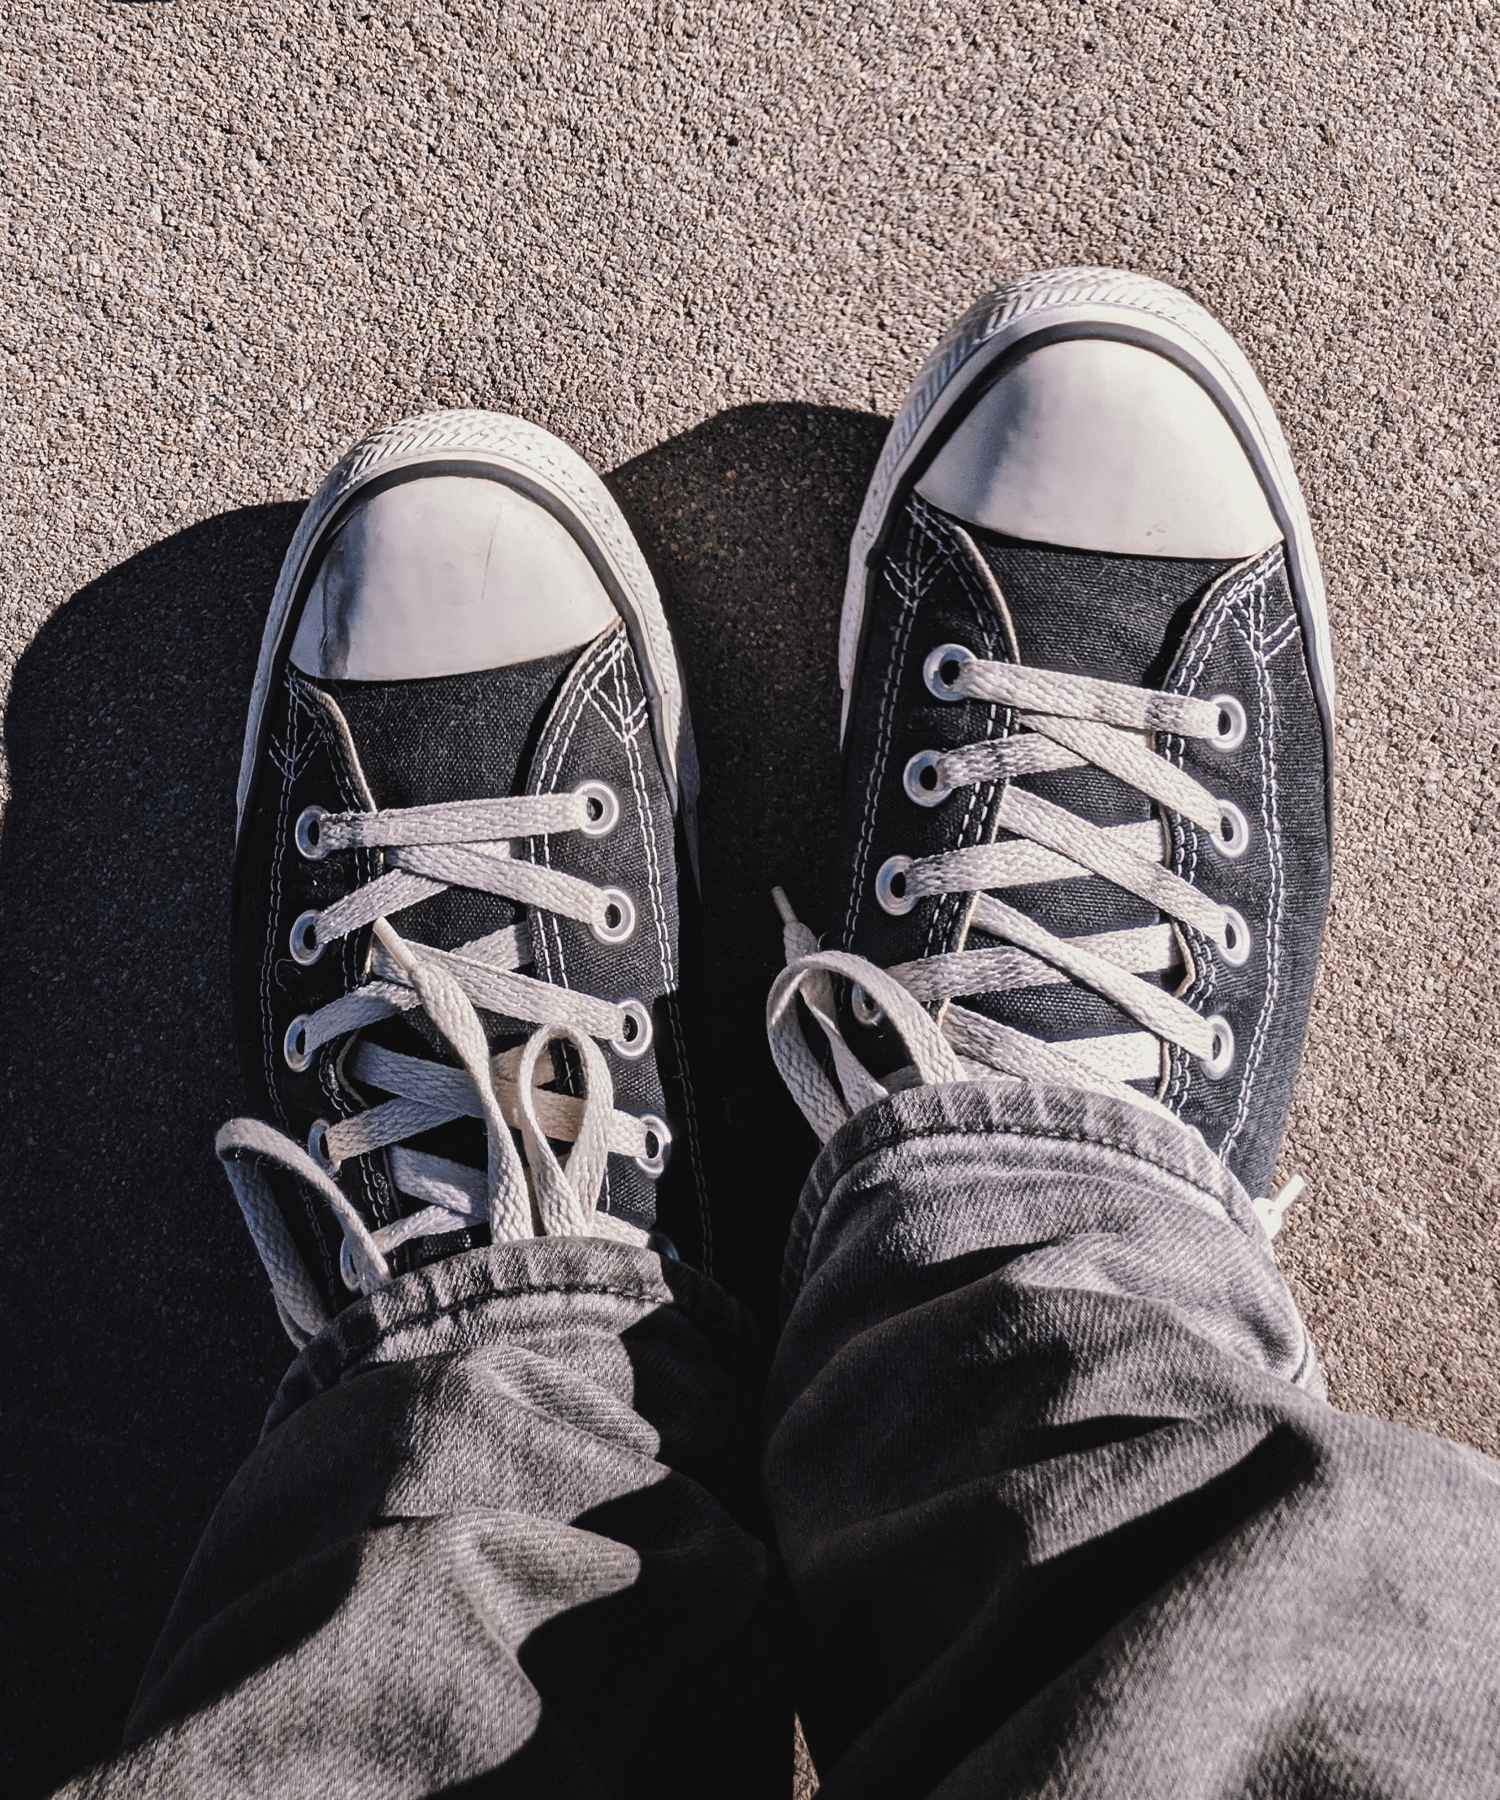 A person wearing jeans and black Converse sneakers - Converse